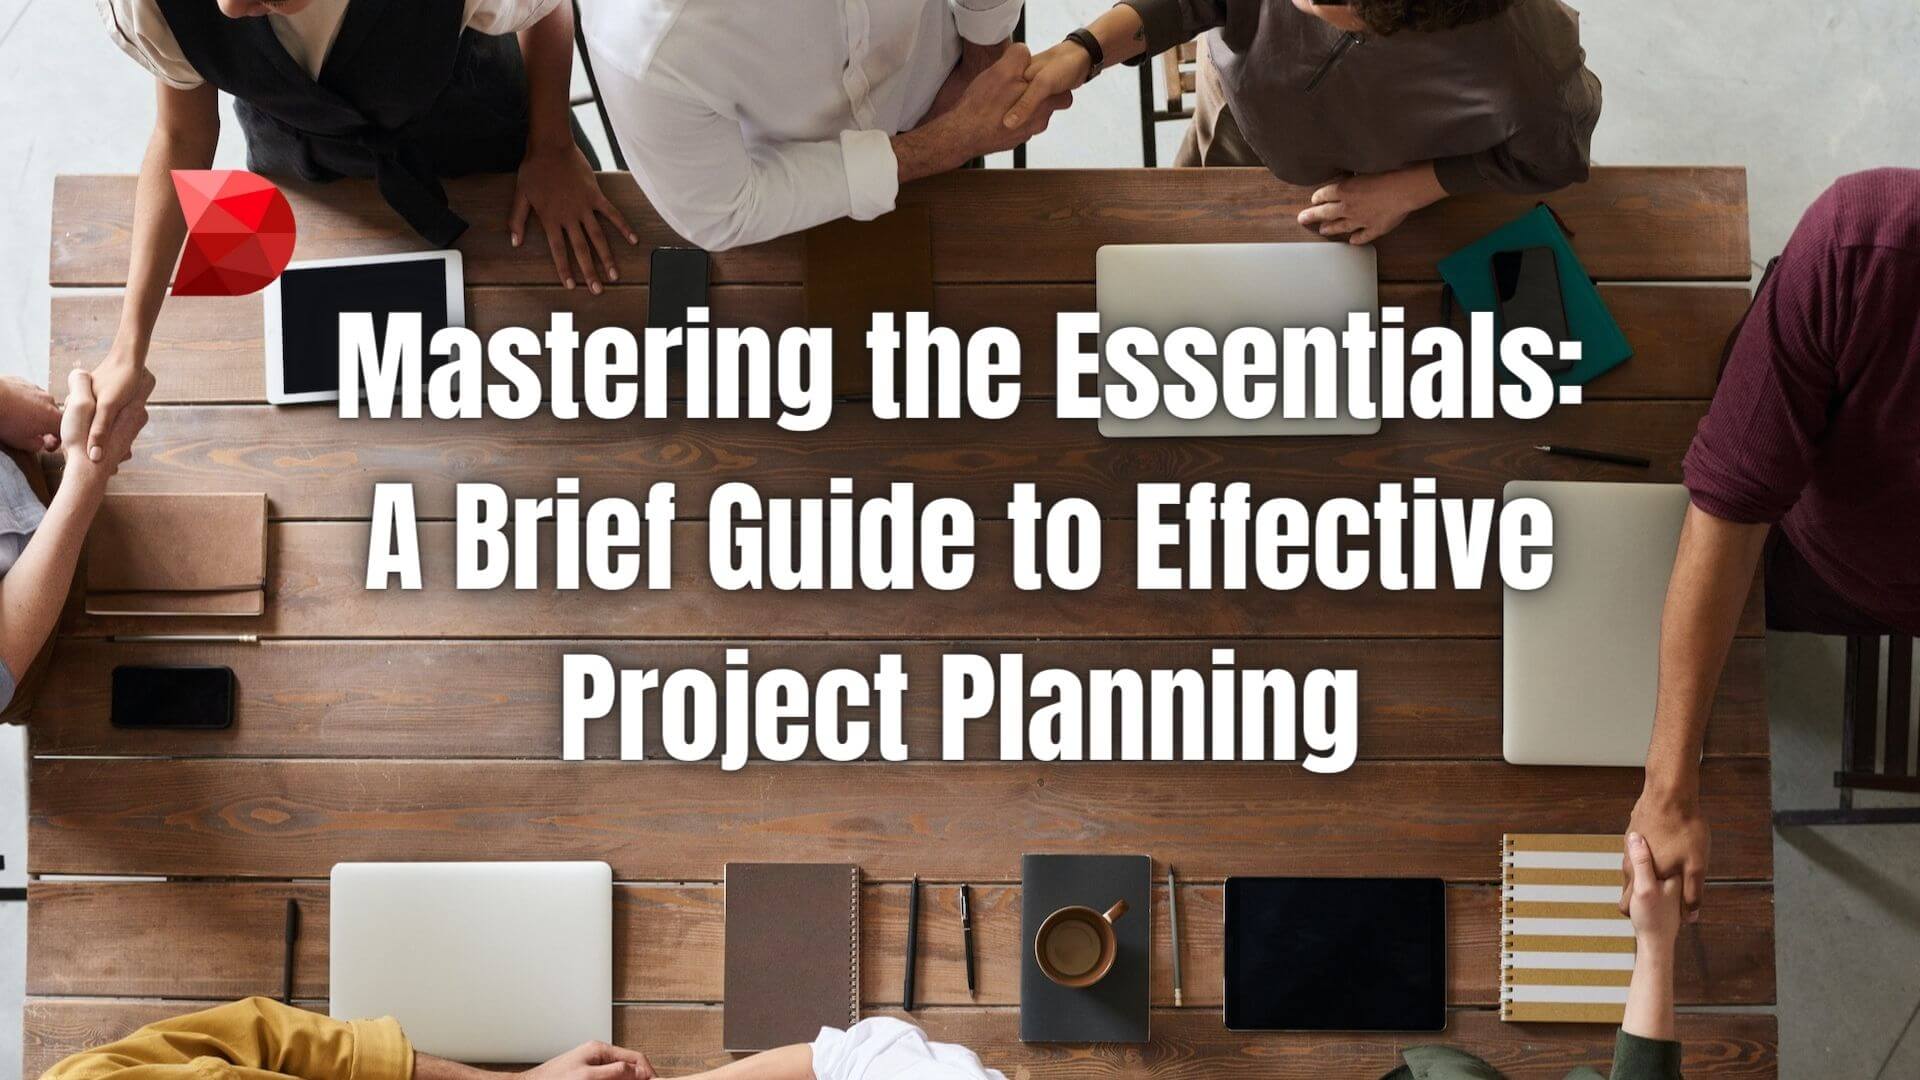 Project planning is the cornerstone of successful project management. But how do we create an effective project plan? Learn how!